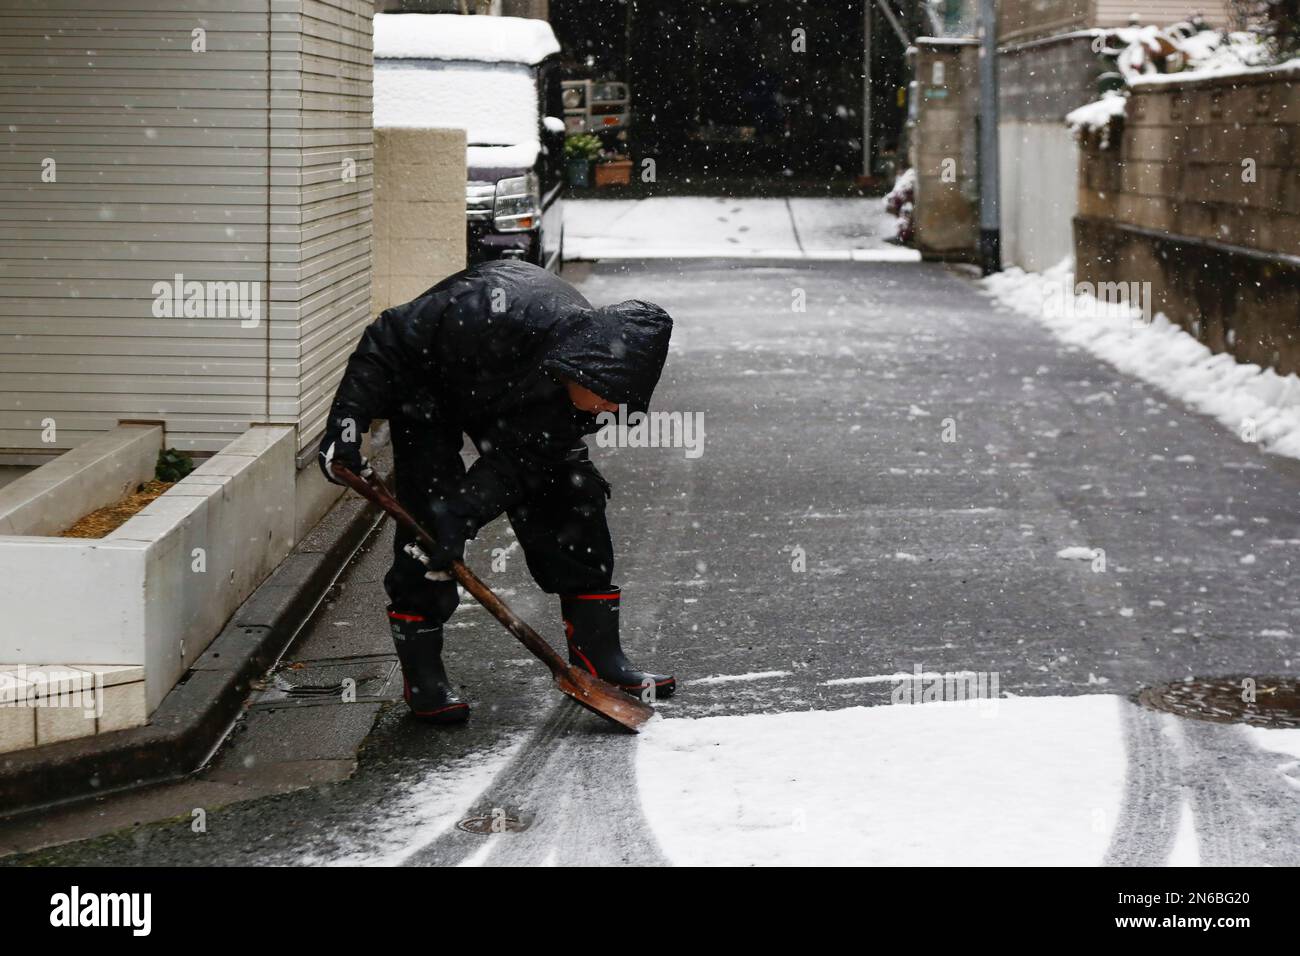 Tokyo gets heavy snow advisory as weather agency warns of disruptions